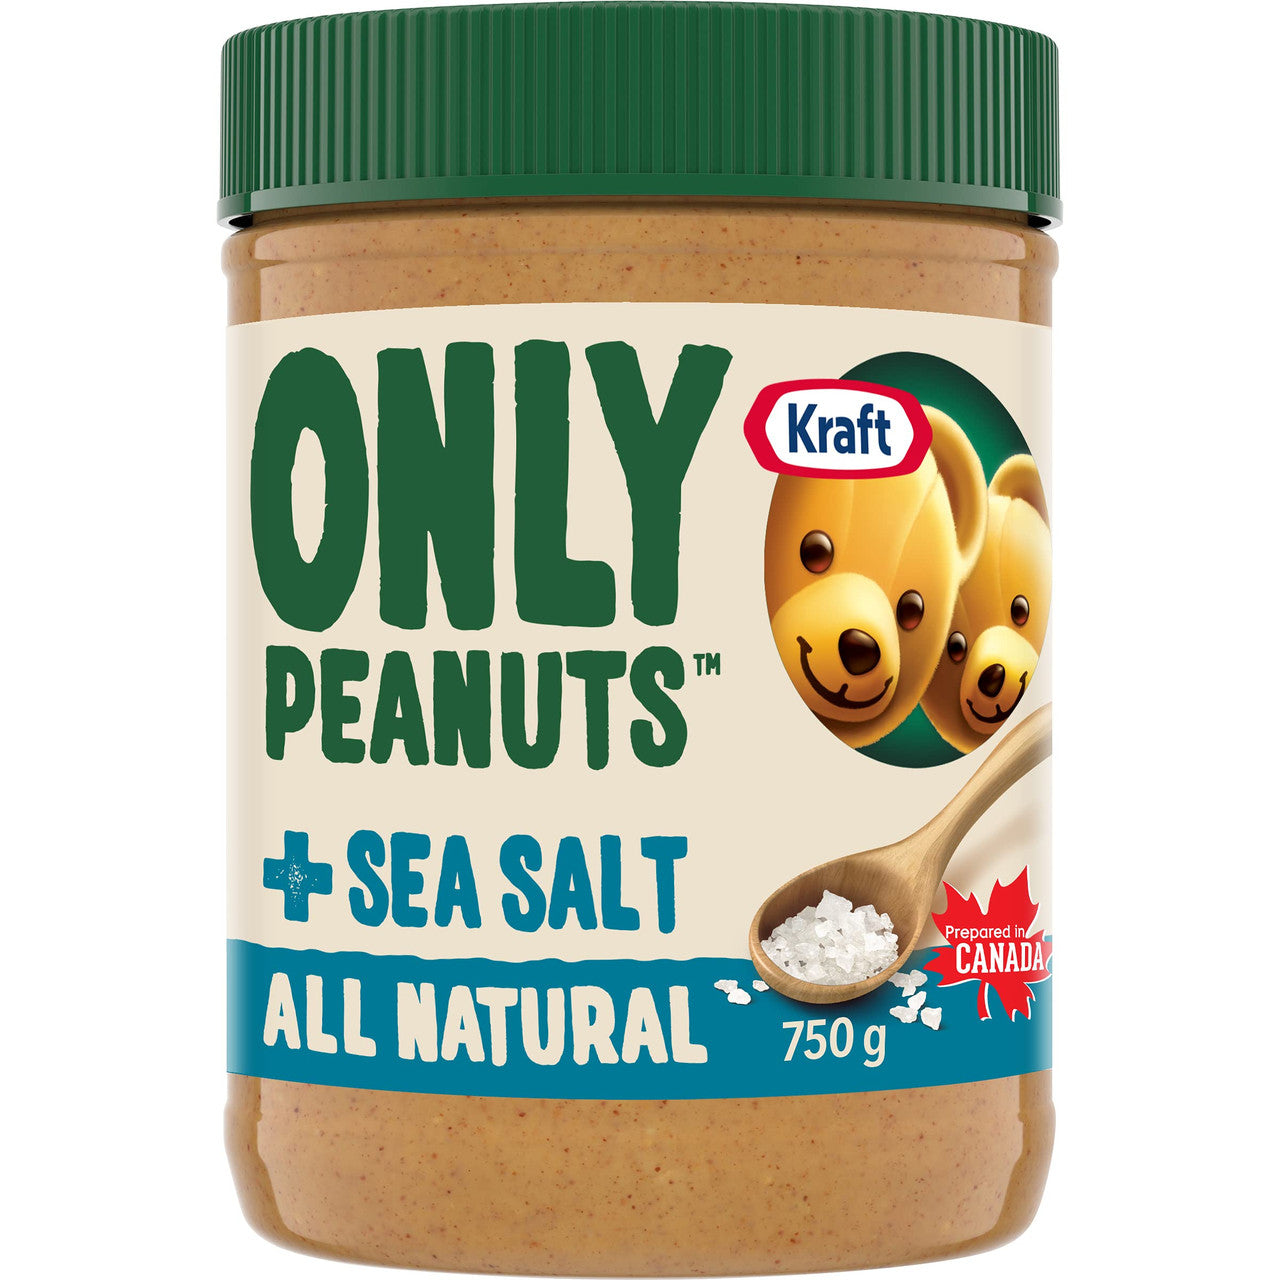 Kraft All Natural Peanut Butter with Sea Salt, 750g/26.5oz {Imported from Canada}